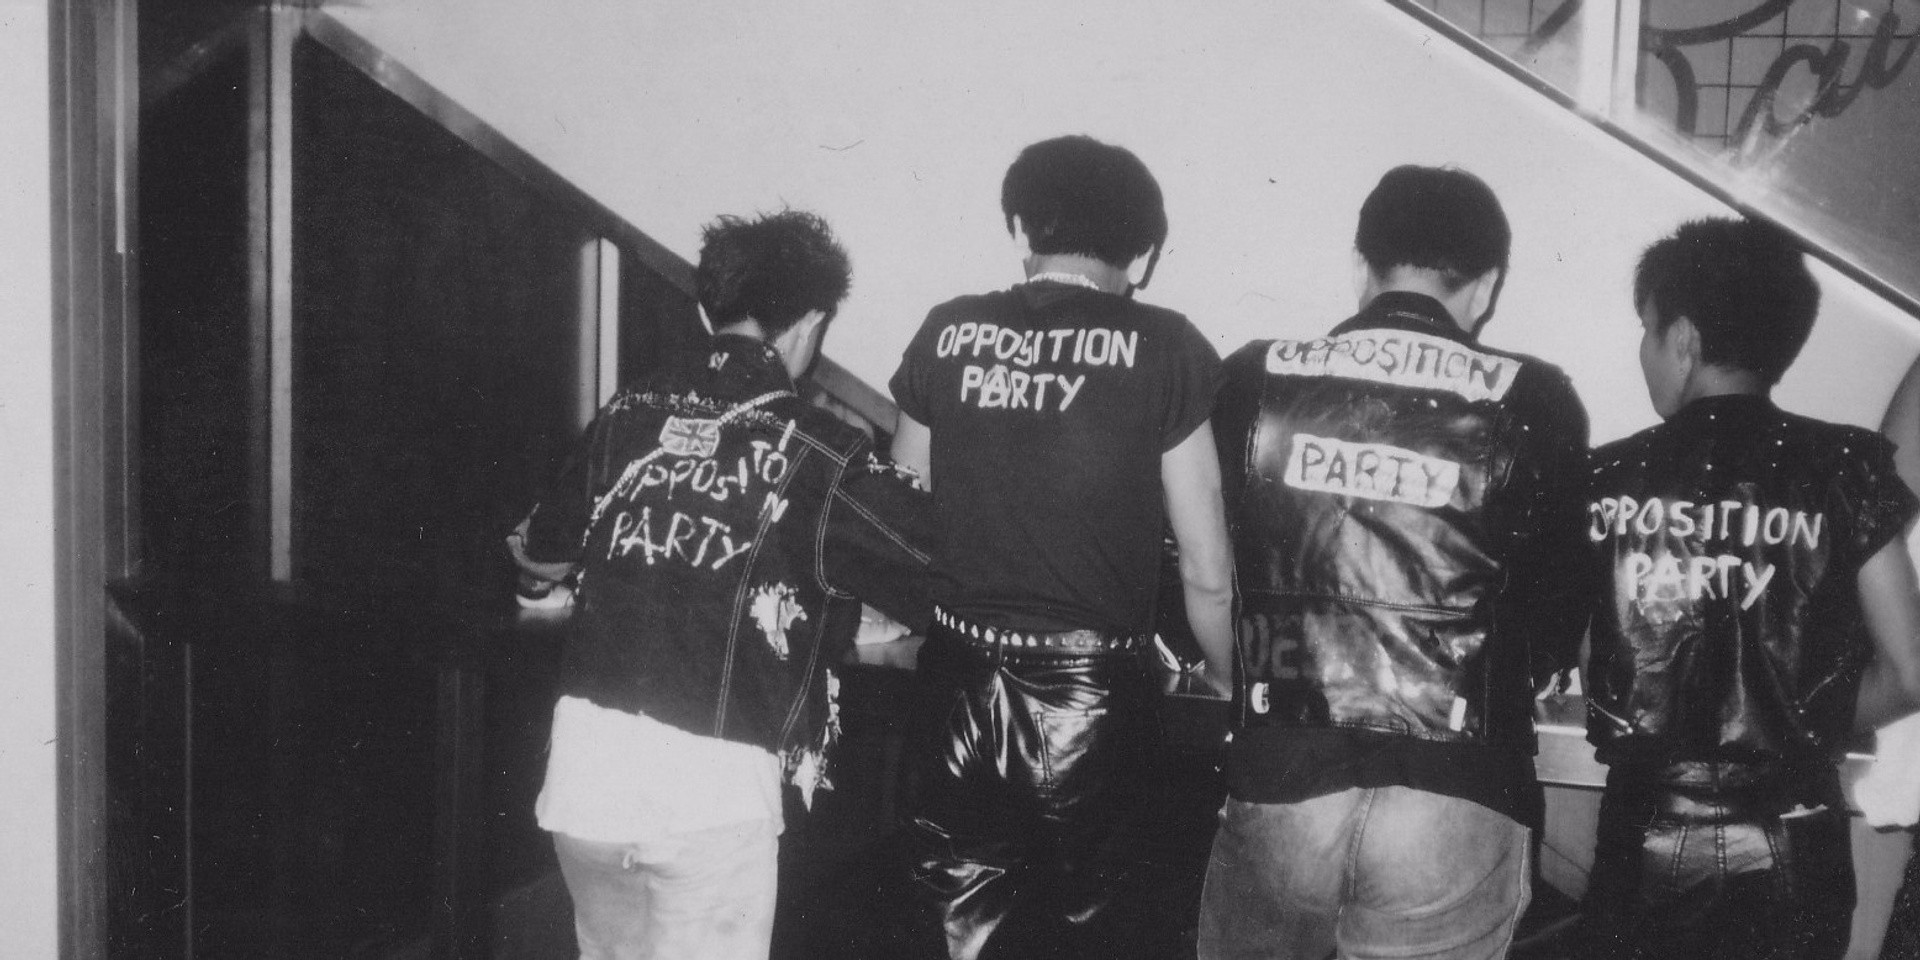 Seminal Singaporean punk/metal band Opposition Party releases 30th Anniversary collector's box-set